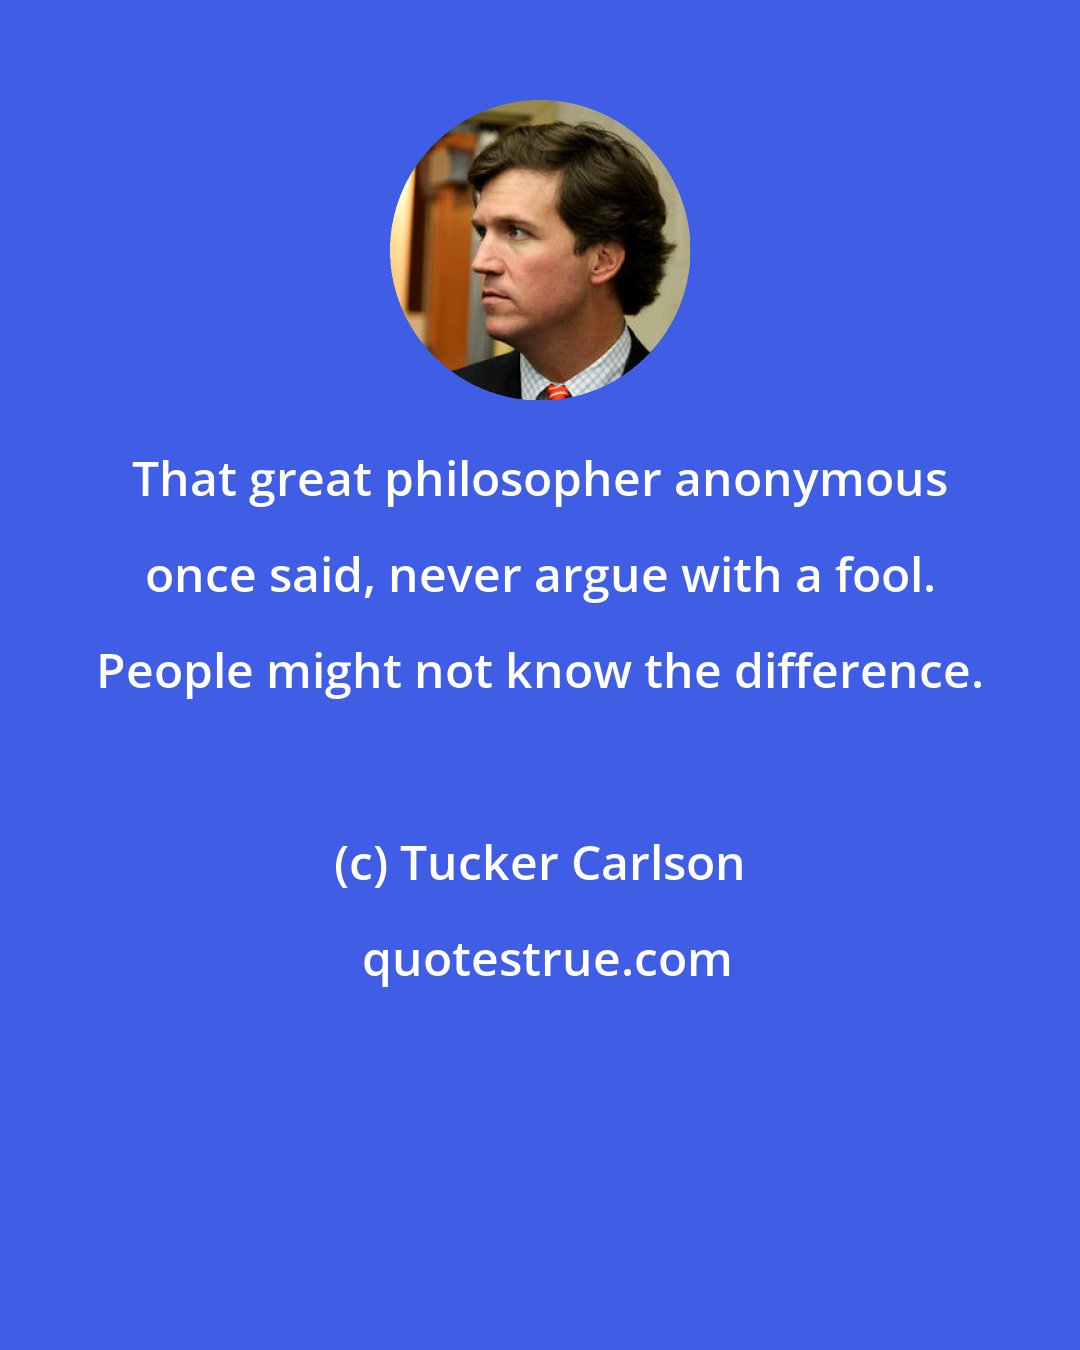 Tucker Carlson: That great philosopher anonymous once said, never argue with a fool. People might not know the difference.